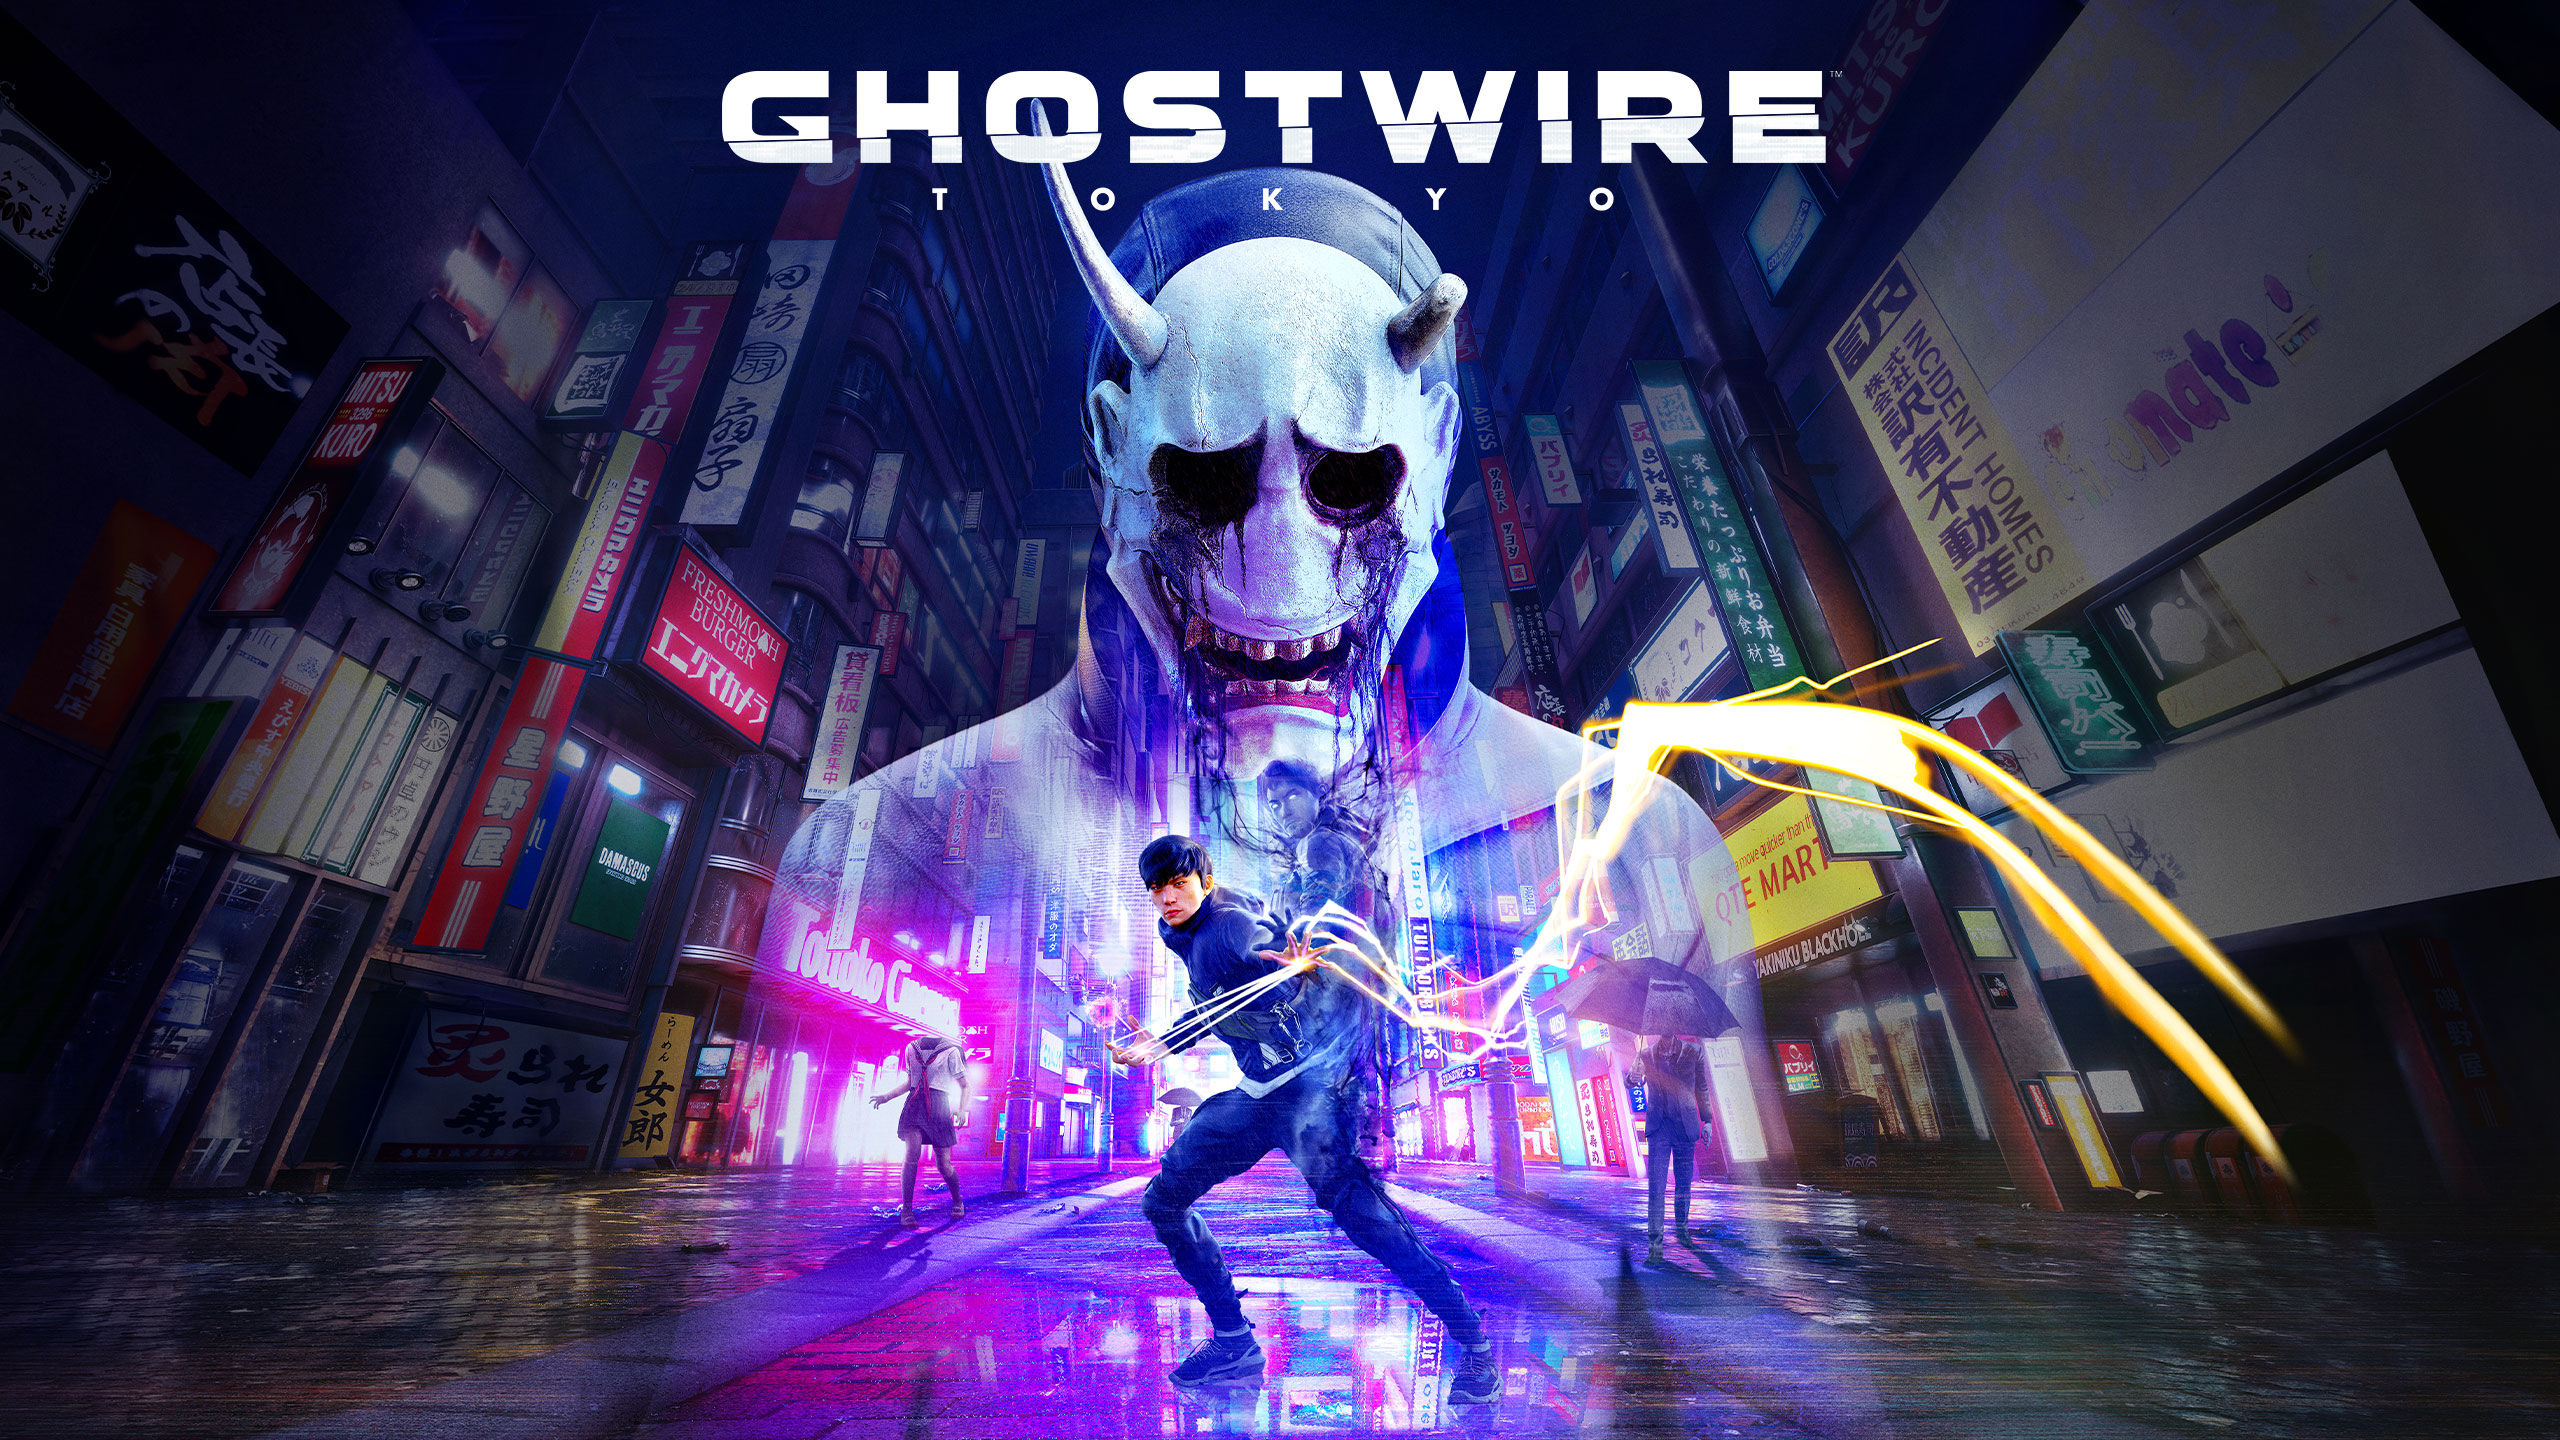 Ghostwire: Tokyo PC system requirements revealed; GeForce RTX 3080 required  for 4K 30 FPS gameplay with raytracing enabled - NotebookCheck.net News